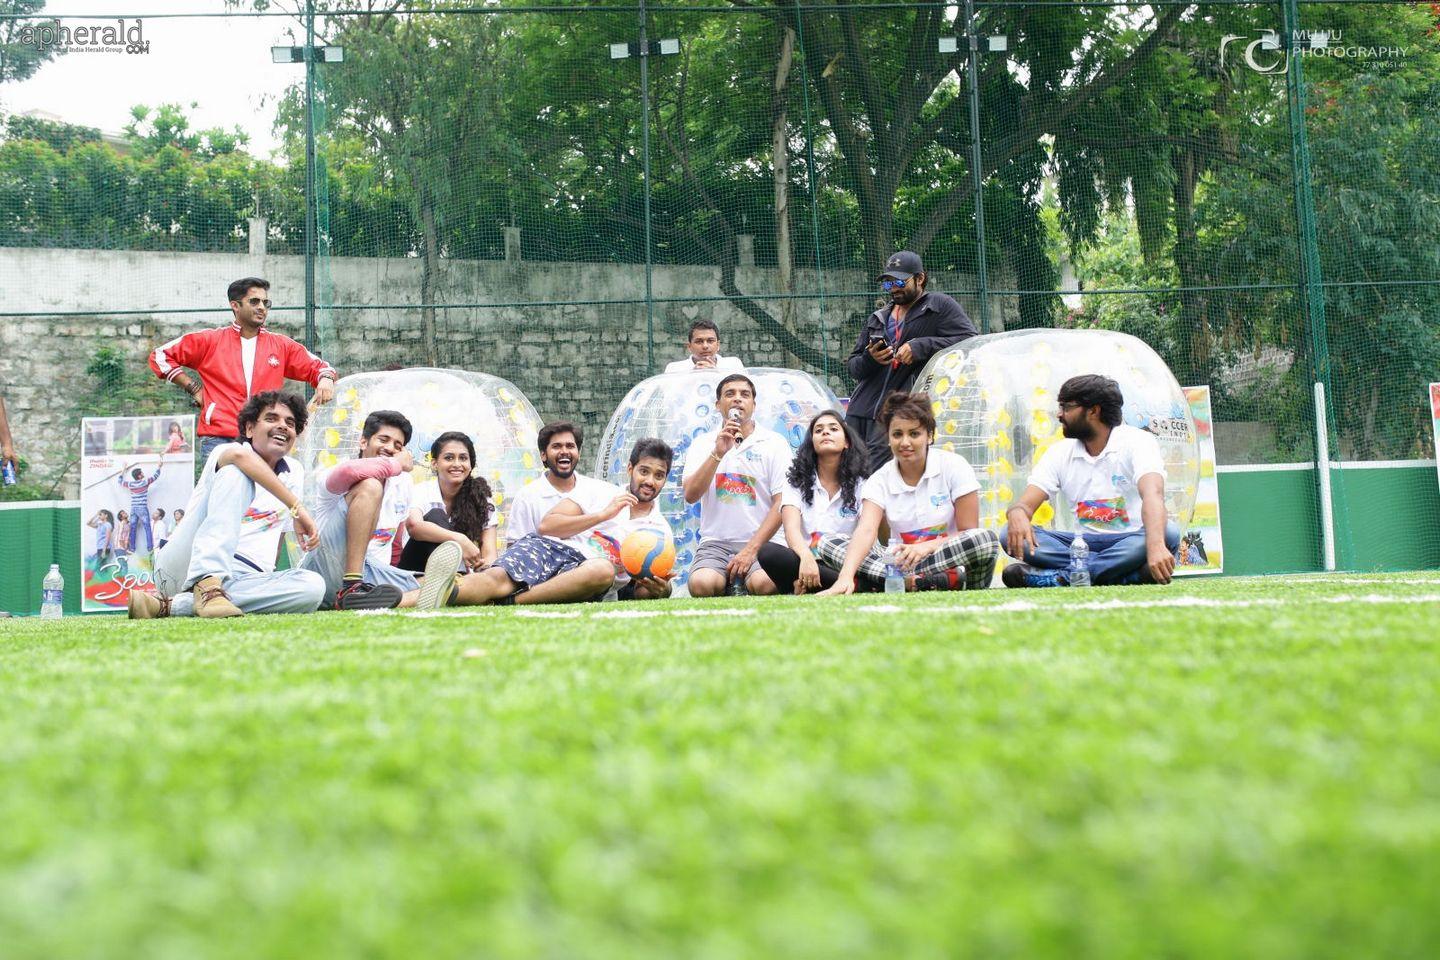 Kerintha Team At Bubble Soccer Event